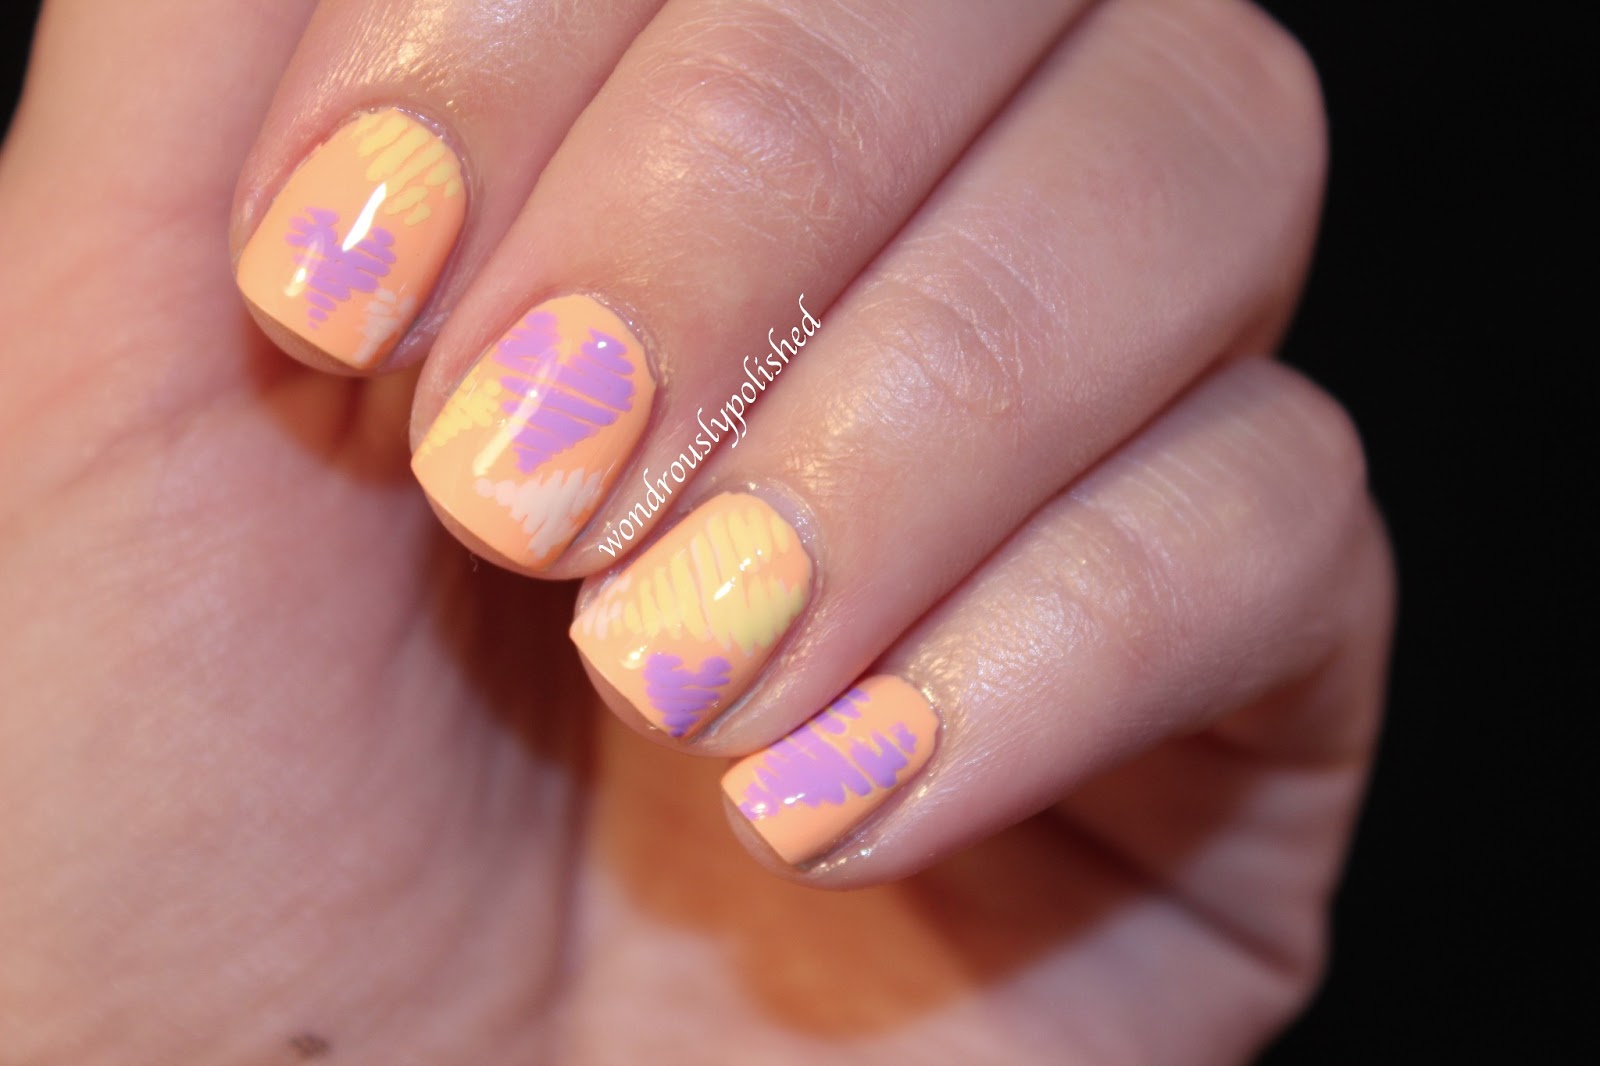 1. "February Nail Colors: The Hottest Shades for the Month" - wide 1